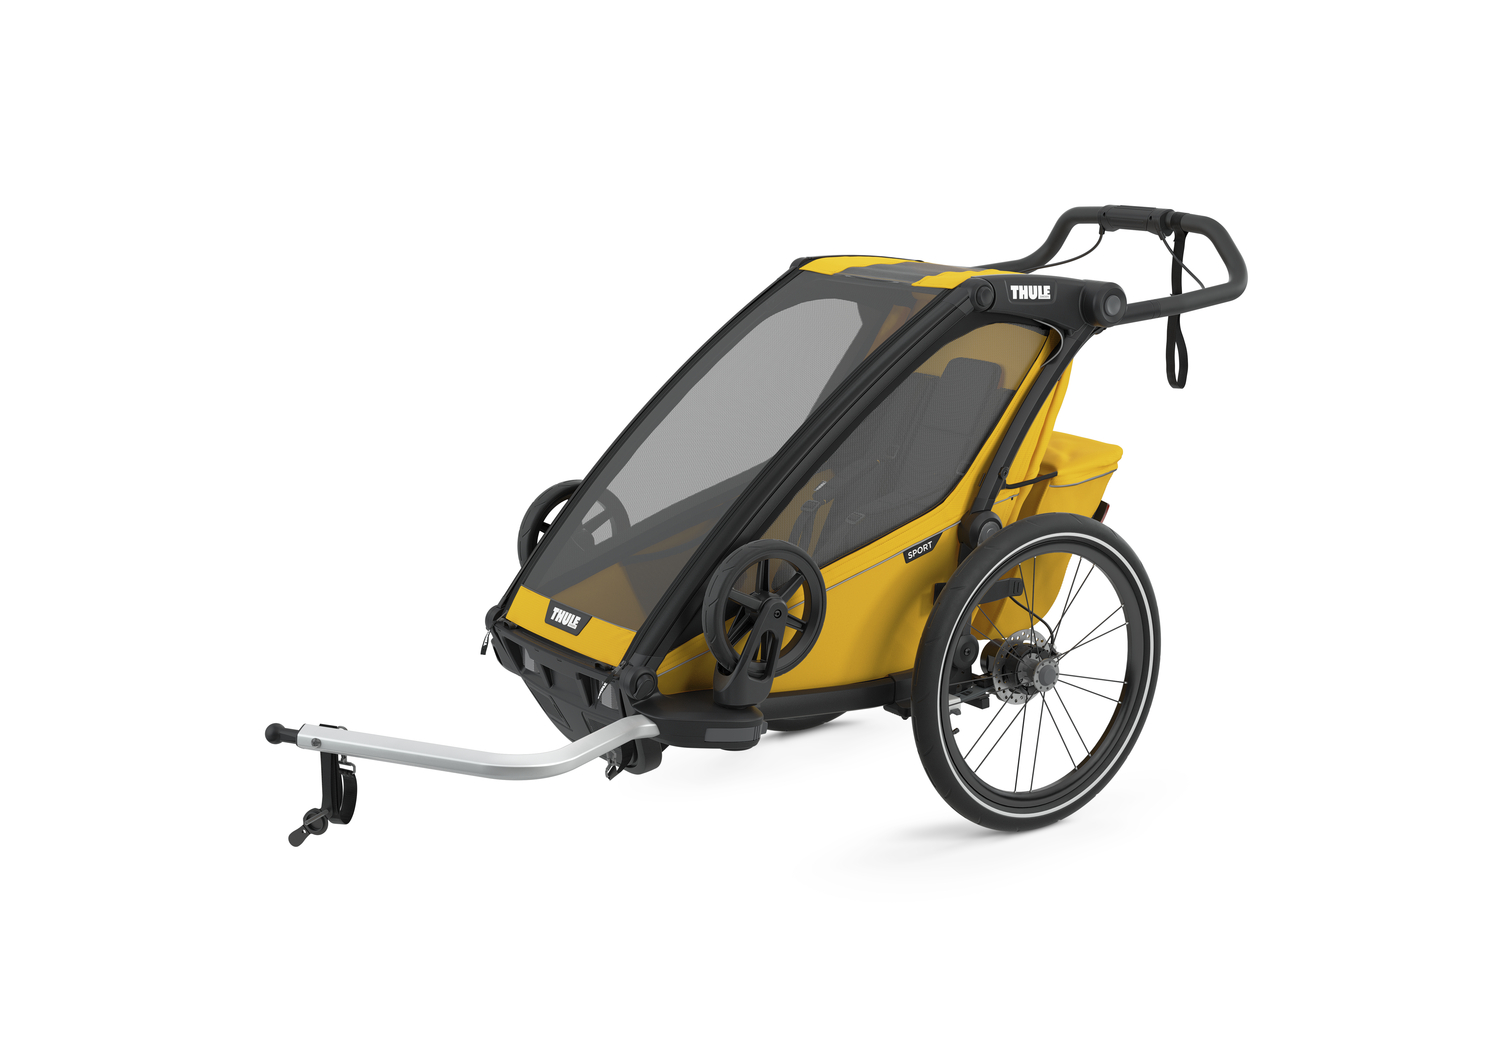 Thule Chariot Sport 1 - Spectra Yellow